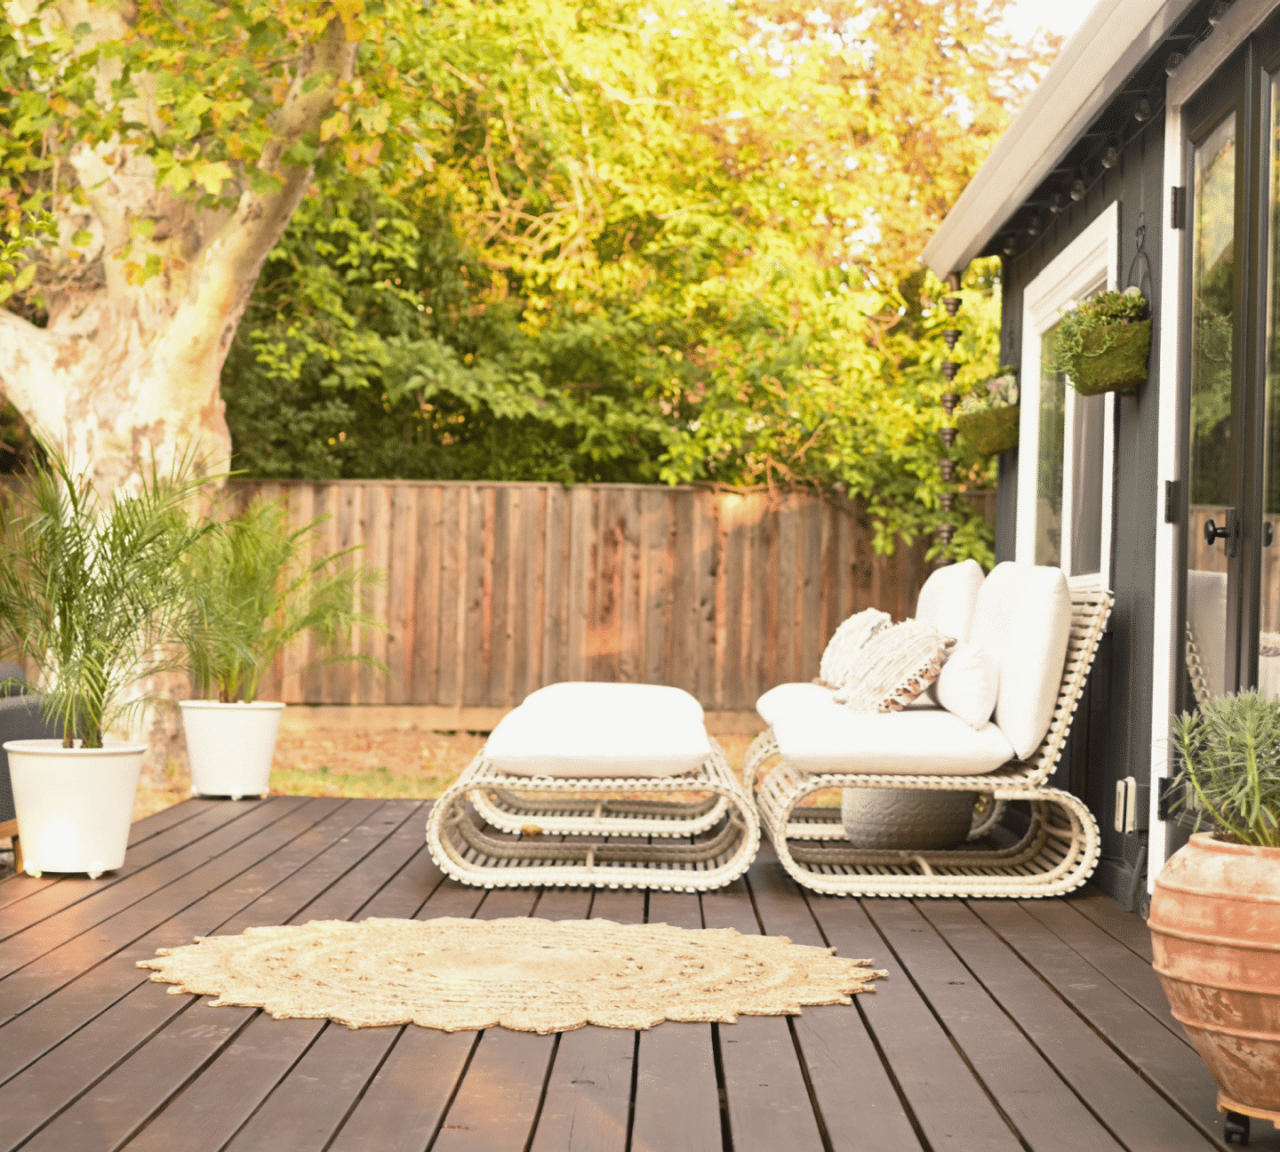 A deck stained a dark red-brown with potted plants, a circular outdoor rug and white modern furniture.